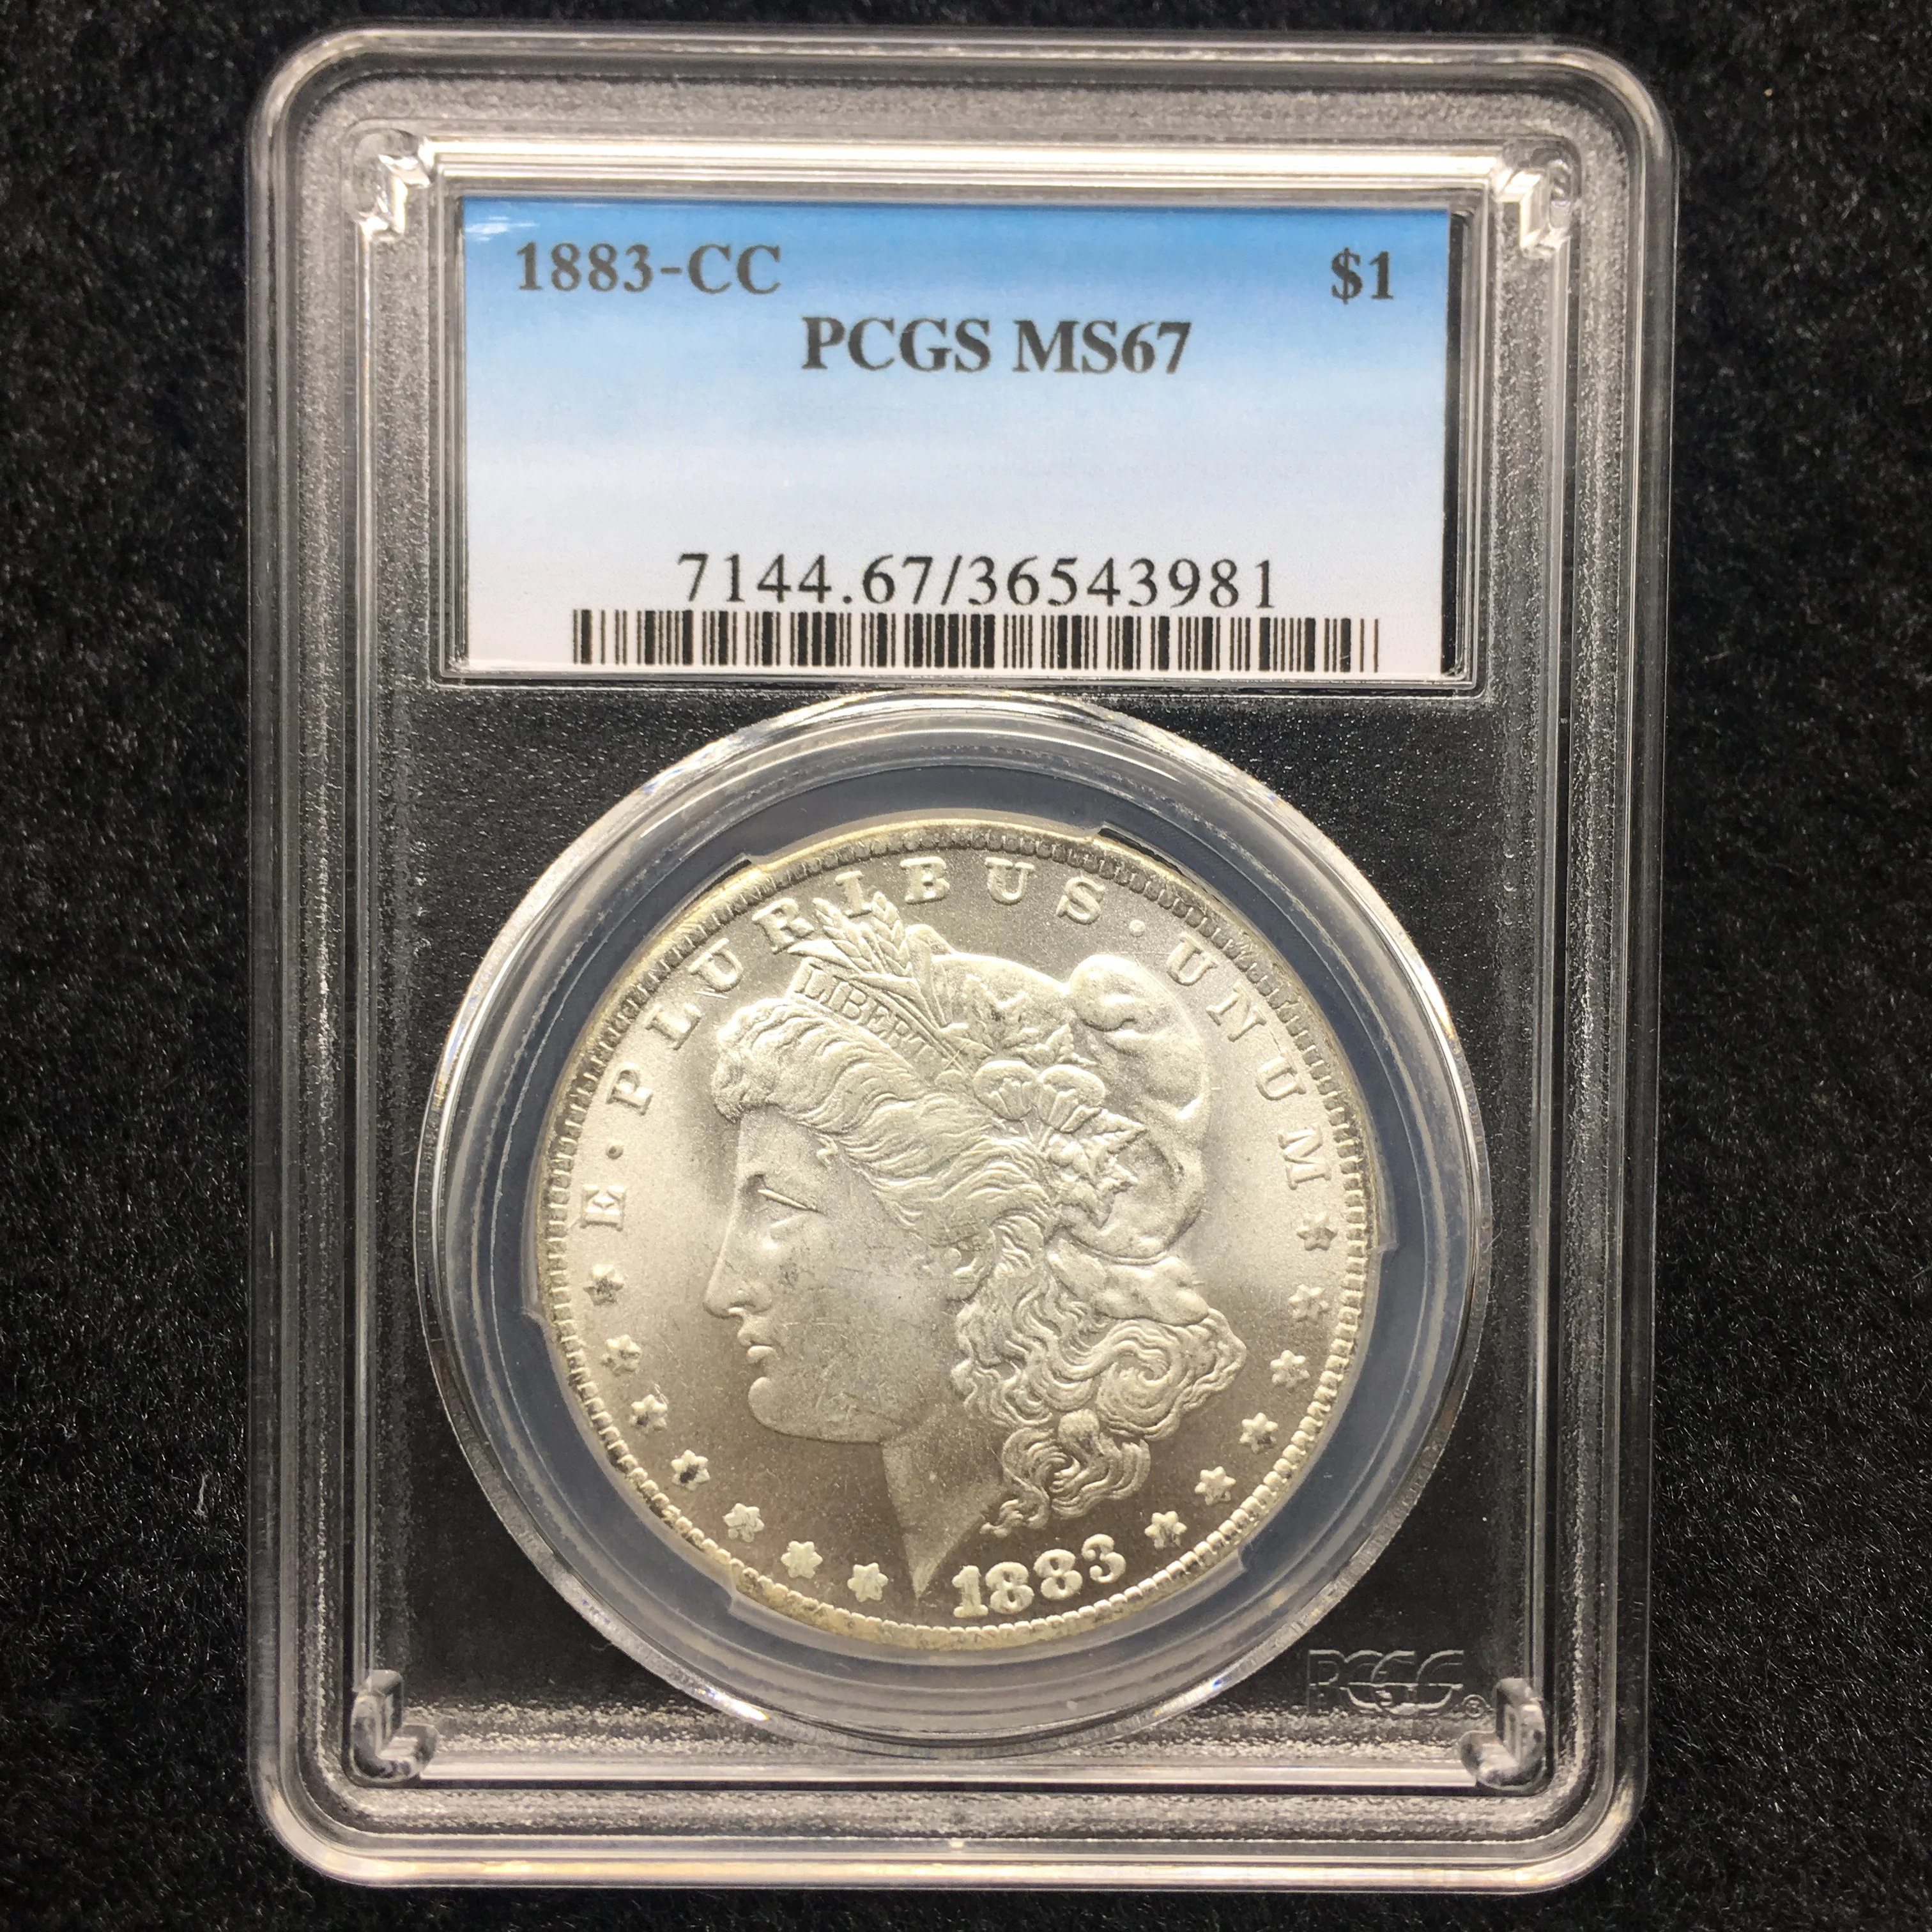 

1883-CC USA Morgan Dollar Coin Rating Silver Coins Sealed in Box,High Quality Collectibles Graded Coins Holder PCGS MS67